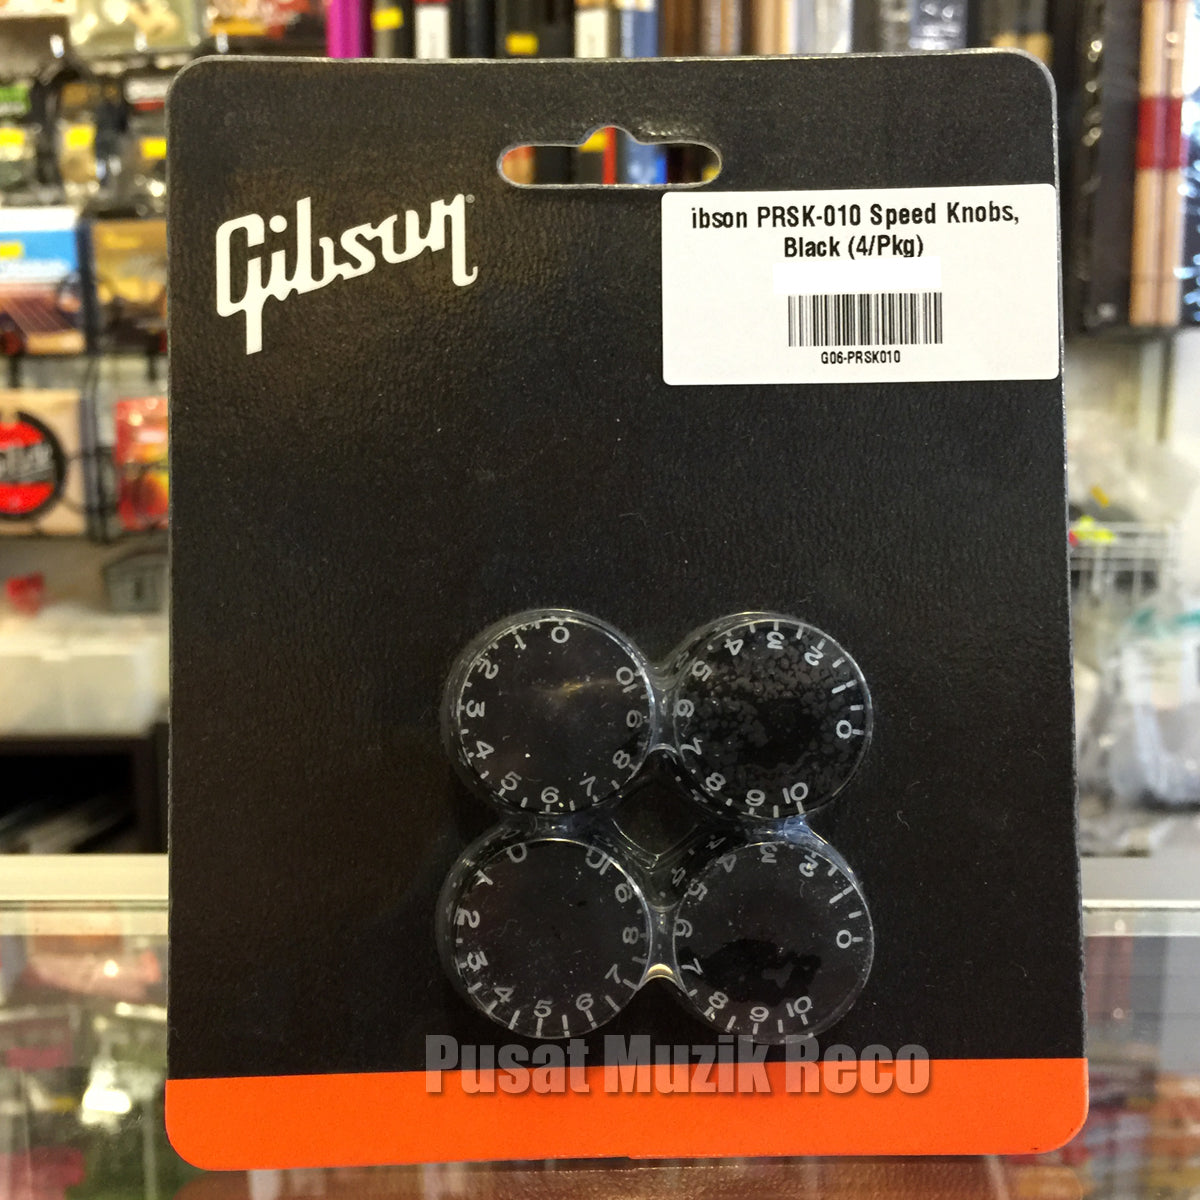 Gibson PRSK-010 Guitar Speed Knobs - 4 Pack, Black - Reco Music Malaysia